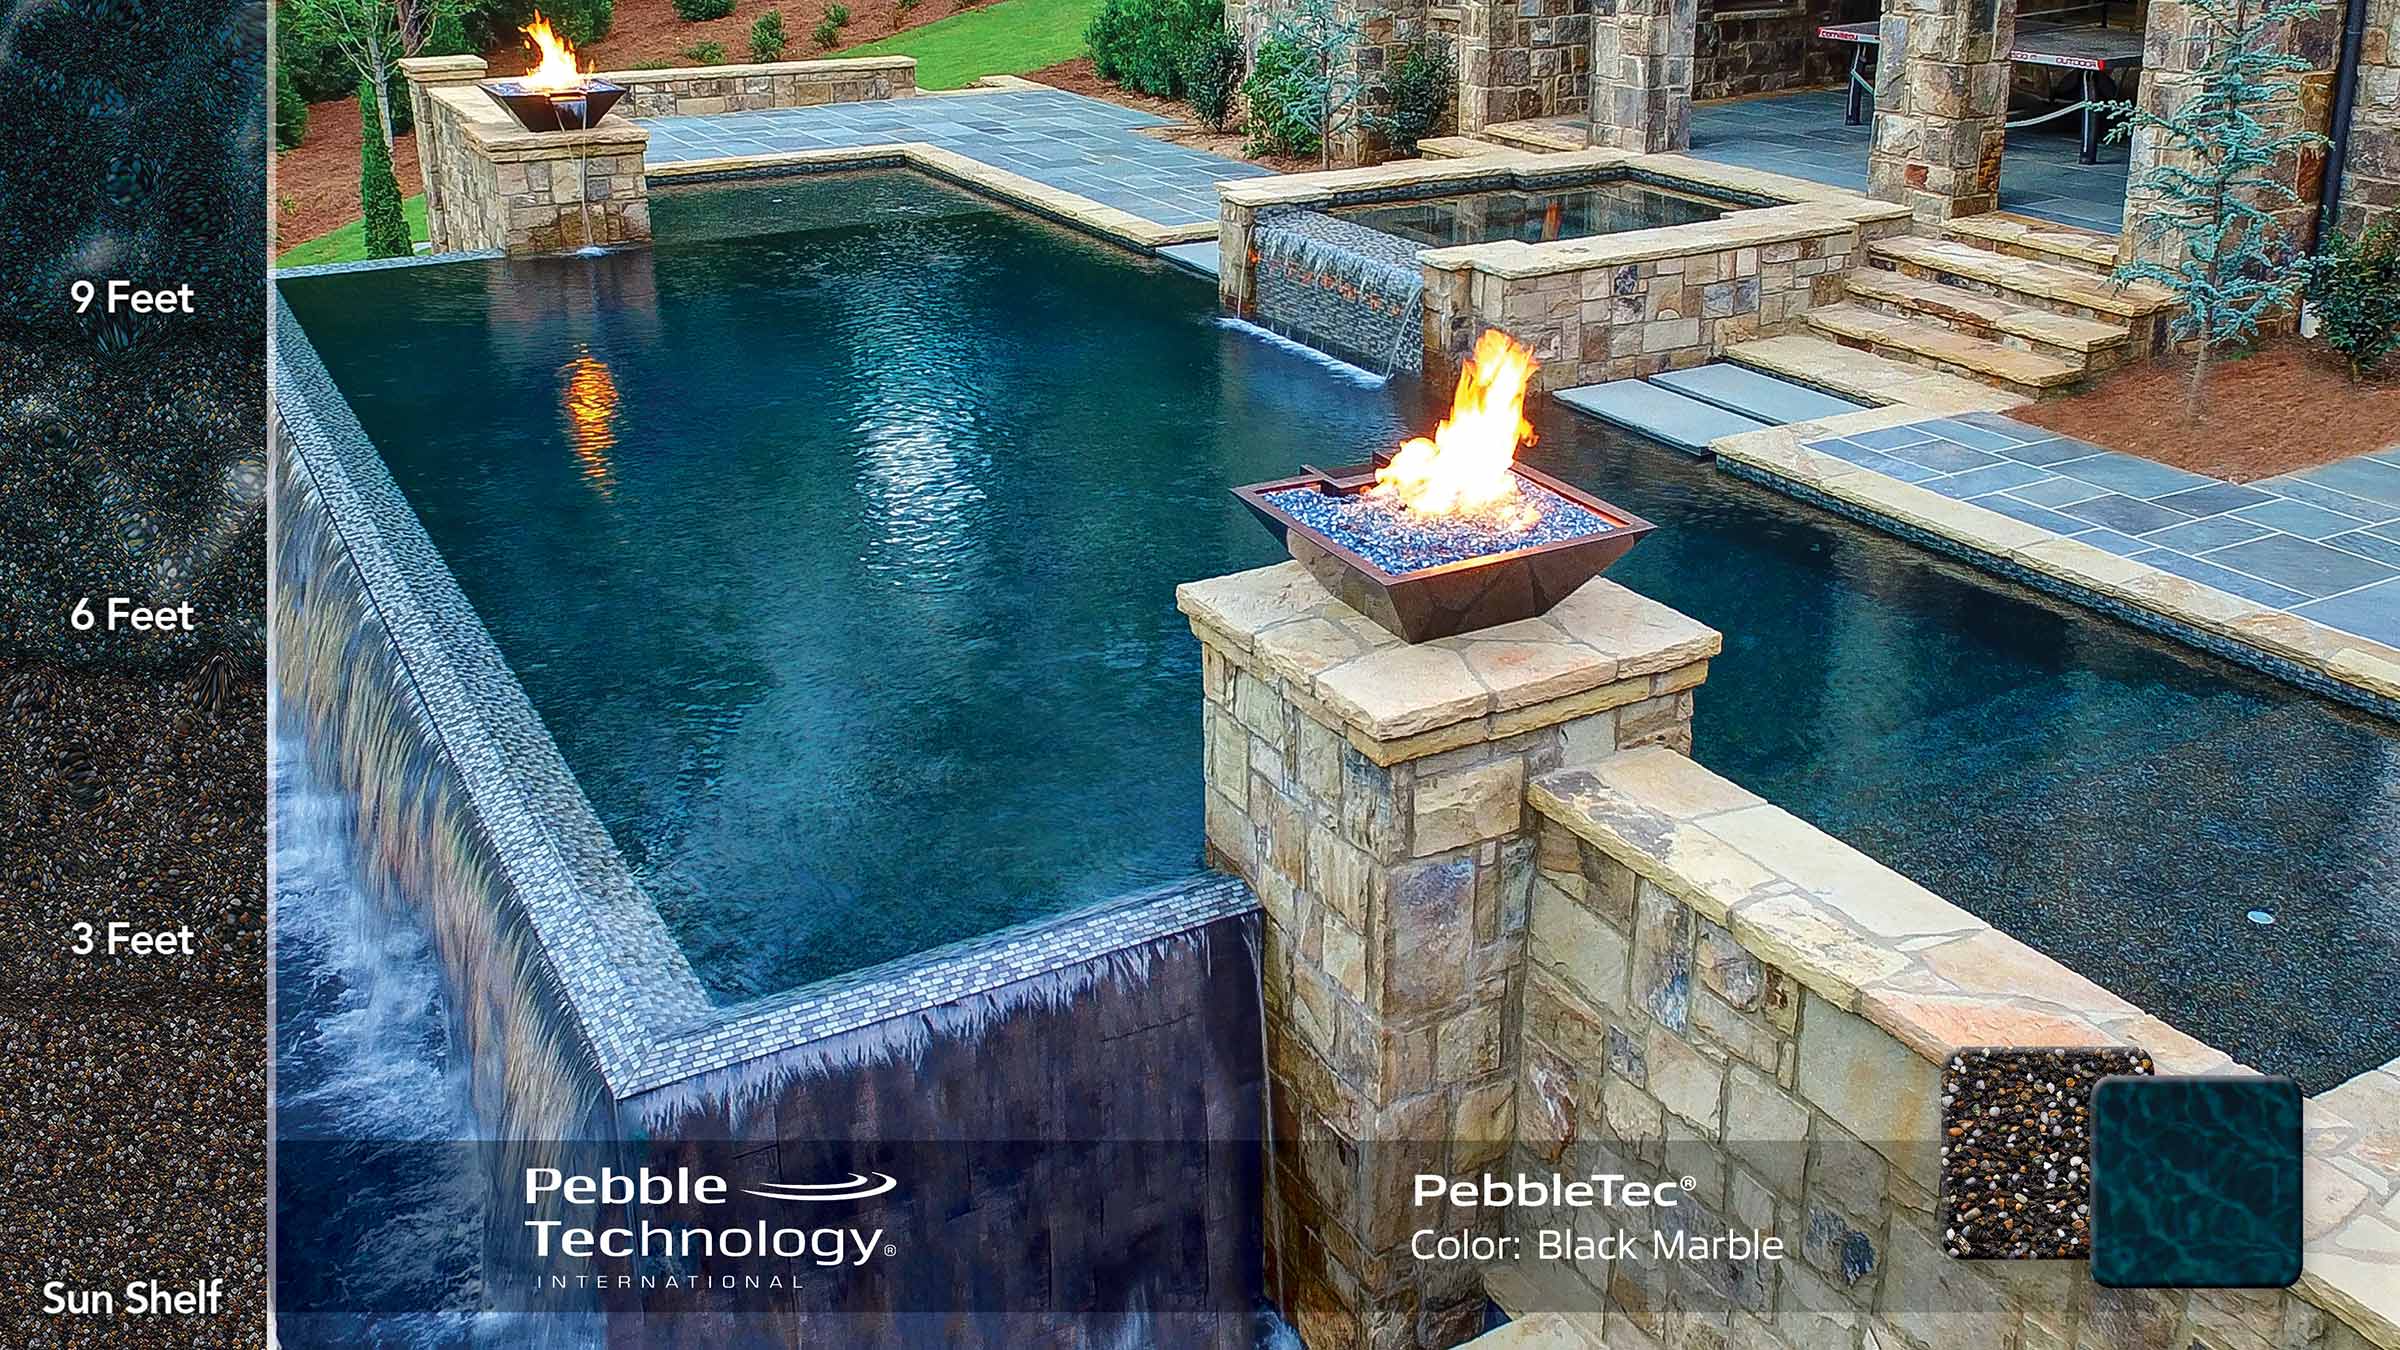 photo of backyard pool design with Fire and Water features in PebbleTec Black Marble Pool Finish: A rich blend of white pebbles and a subtle metallic luster produce a deep dark blue water color.